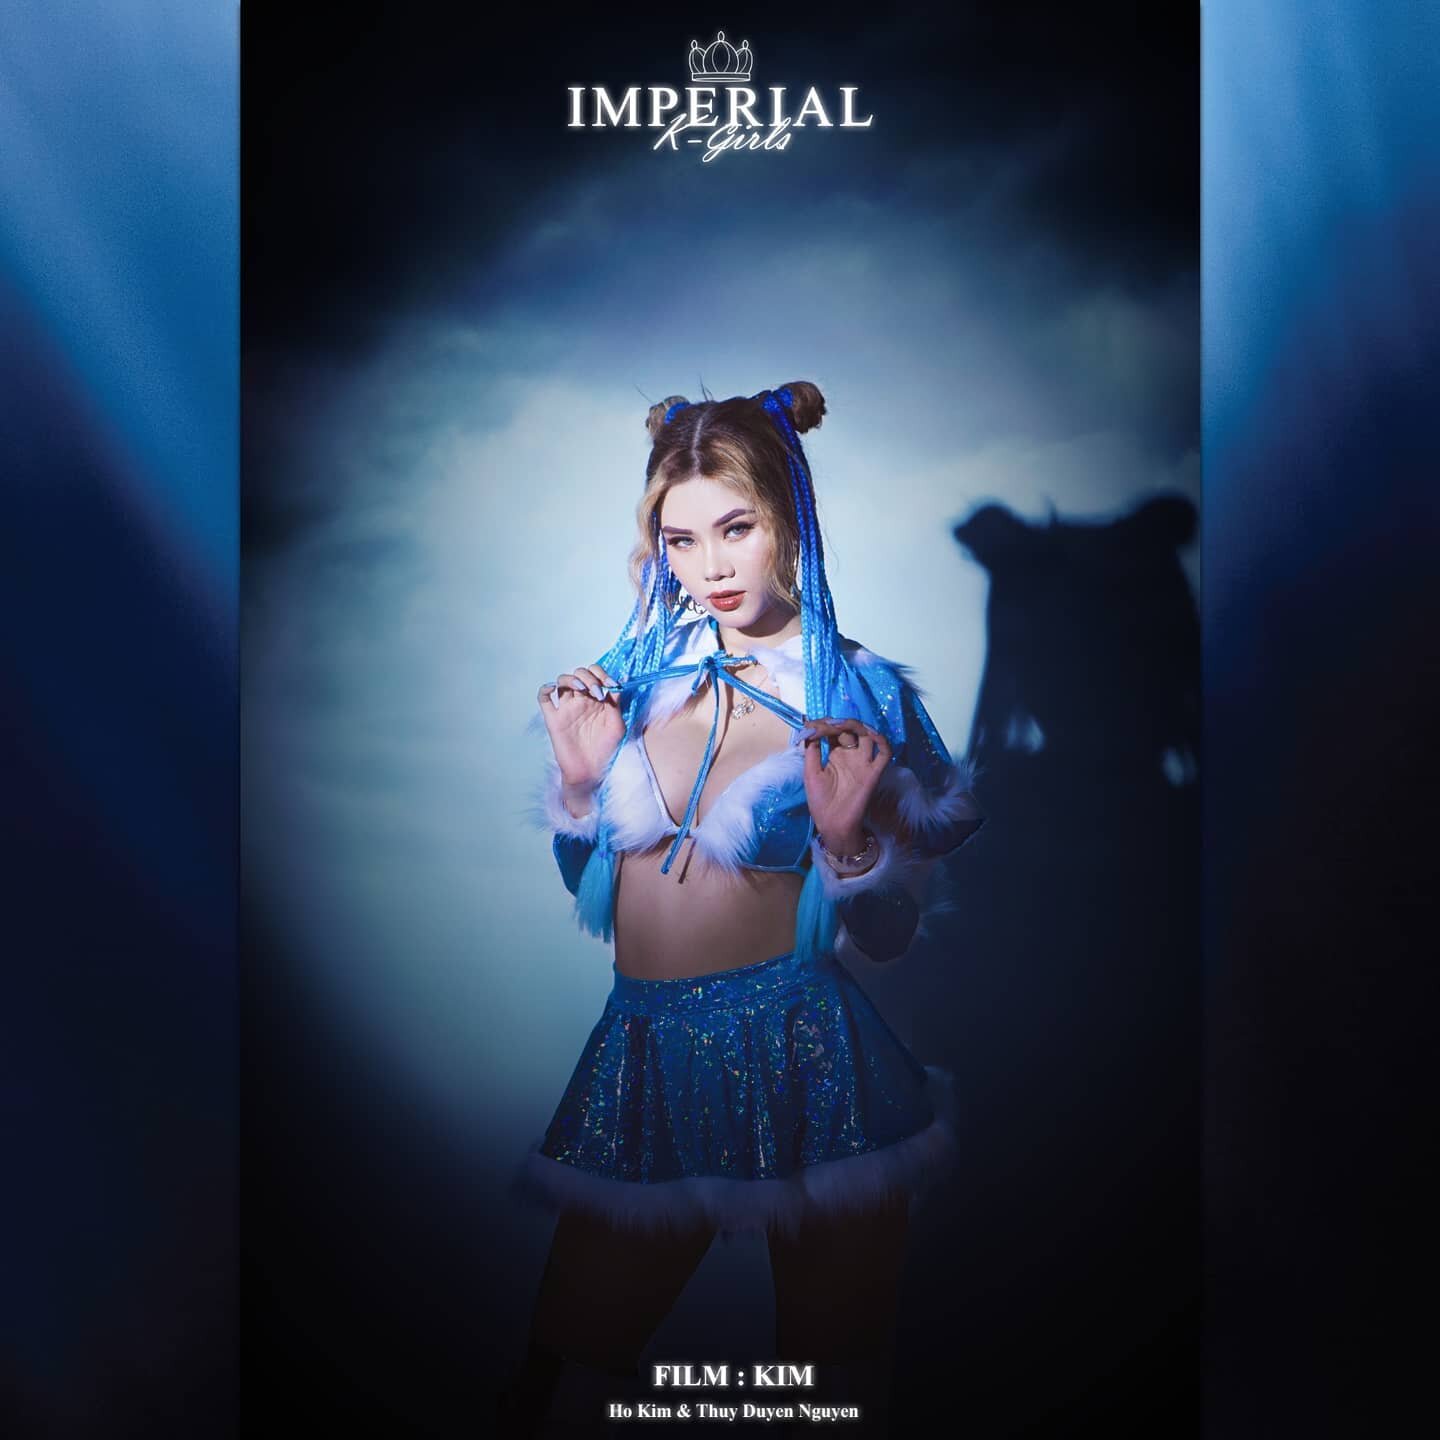 BABY : @thuykim1906
Feat. Imperial K-Girls
by @by.hokim &amp; @thelookbookedition
.
#KTeam #KGirls #Kboys #ImperialKGirls
#hcmc #dancer #illusionstudio 
.
❤&nbsp; 𝗖𝗼𝗻𝘁𝗮𝗰𝘁 𝗳𝗼𝗿 𝘄𝗼𝗿𝗸
𝗛𝗢𝗧𝗟𝗜𝗡𝗘 : 𝘮𝘴. 𝘒𝘢𝘮𝘪 0931 421 421 
𝗠𝗔𝗜𝗟 :